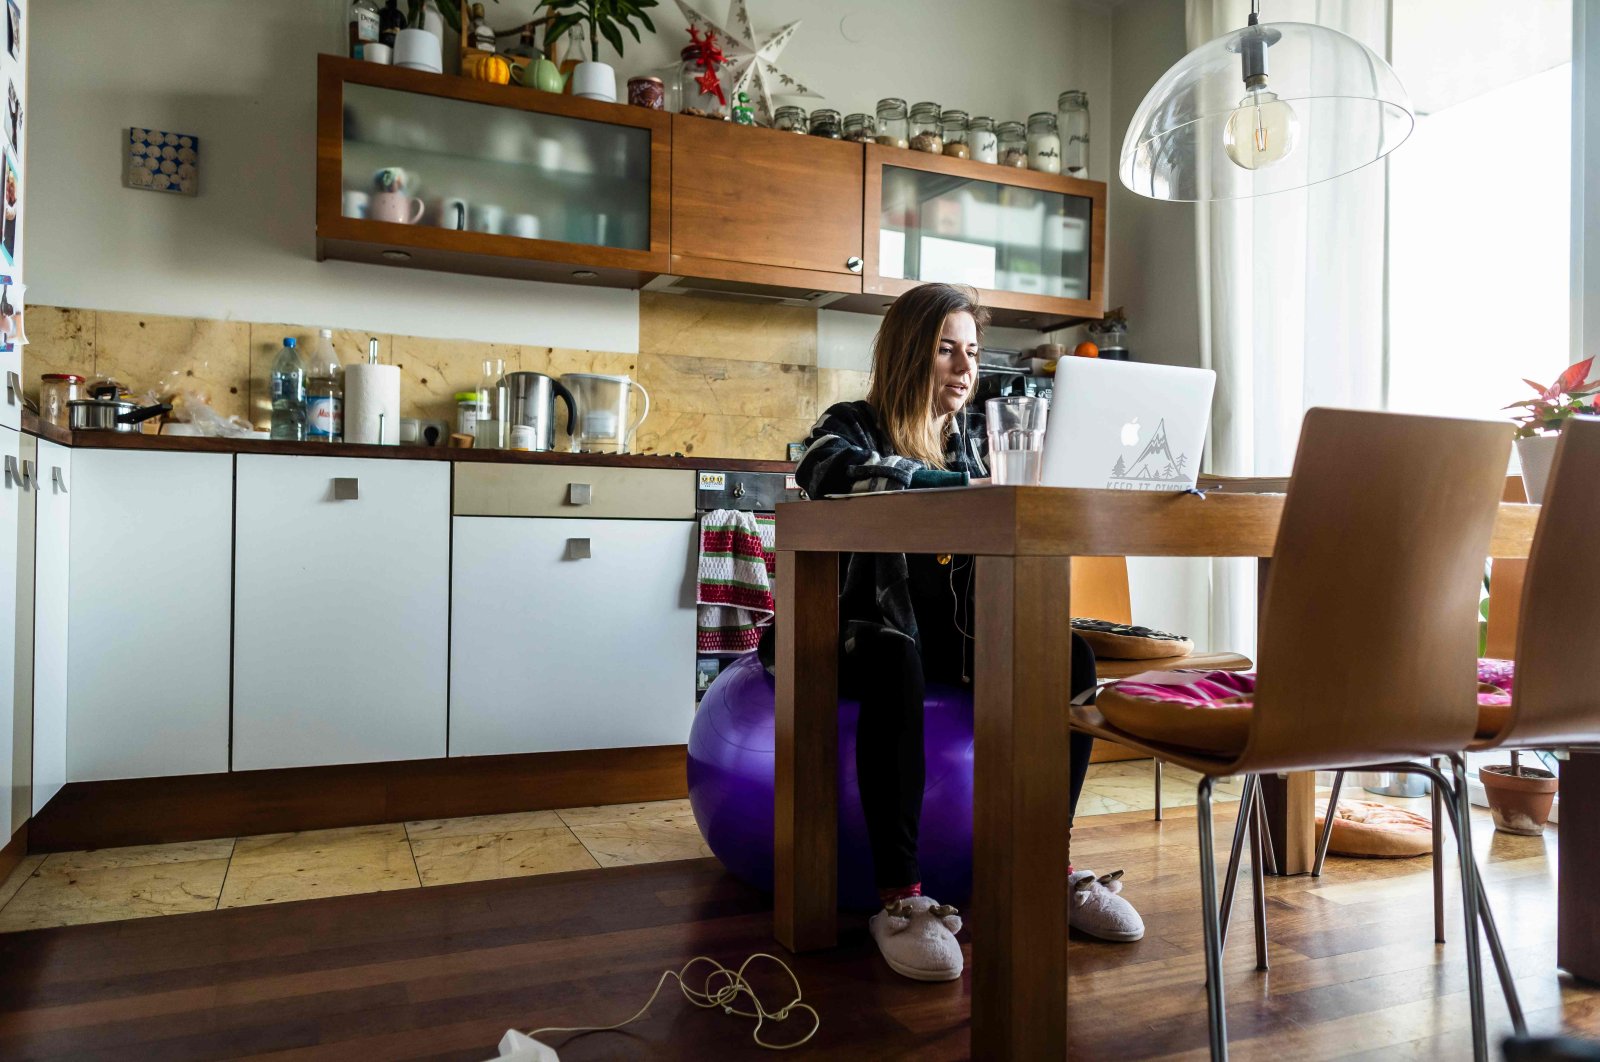 Anna Brymora is seen providing online lessons from the kitchen of her apartment in Warsaw, on Jan. 18, 2021. (AFP Photo)